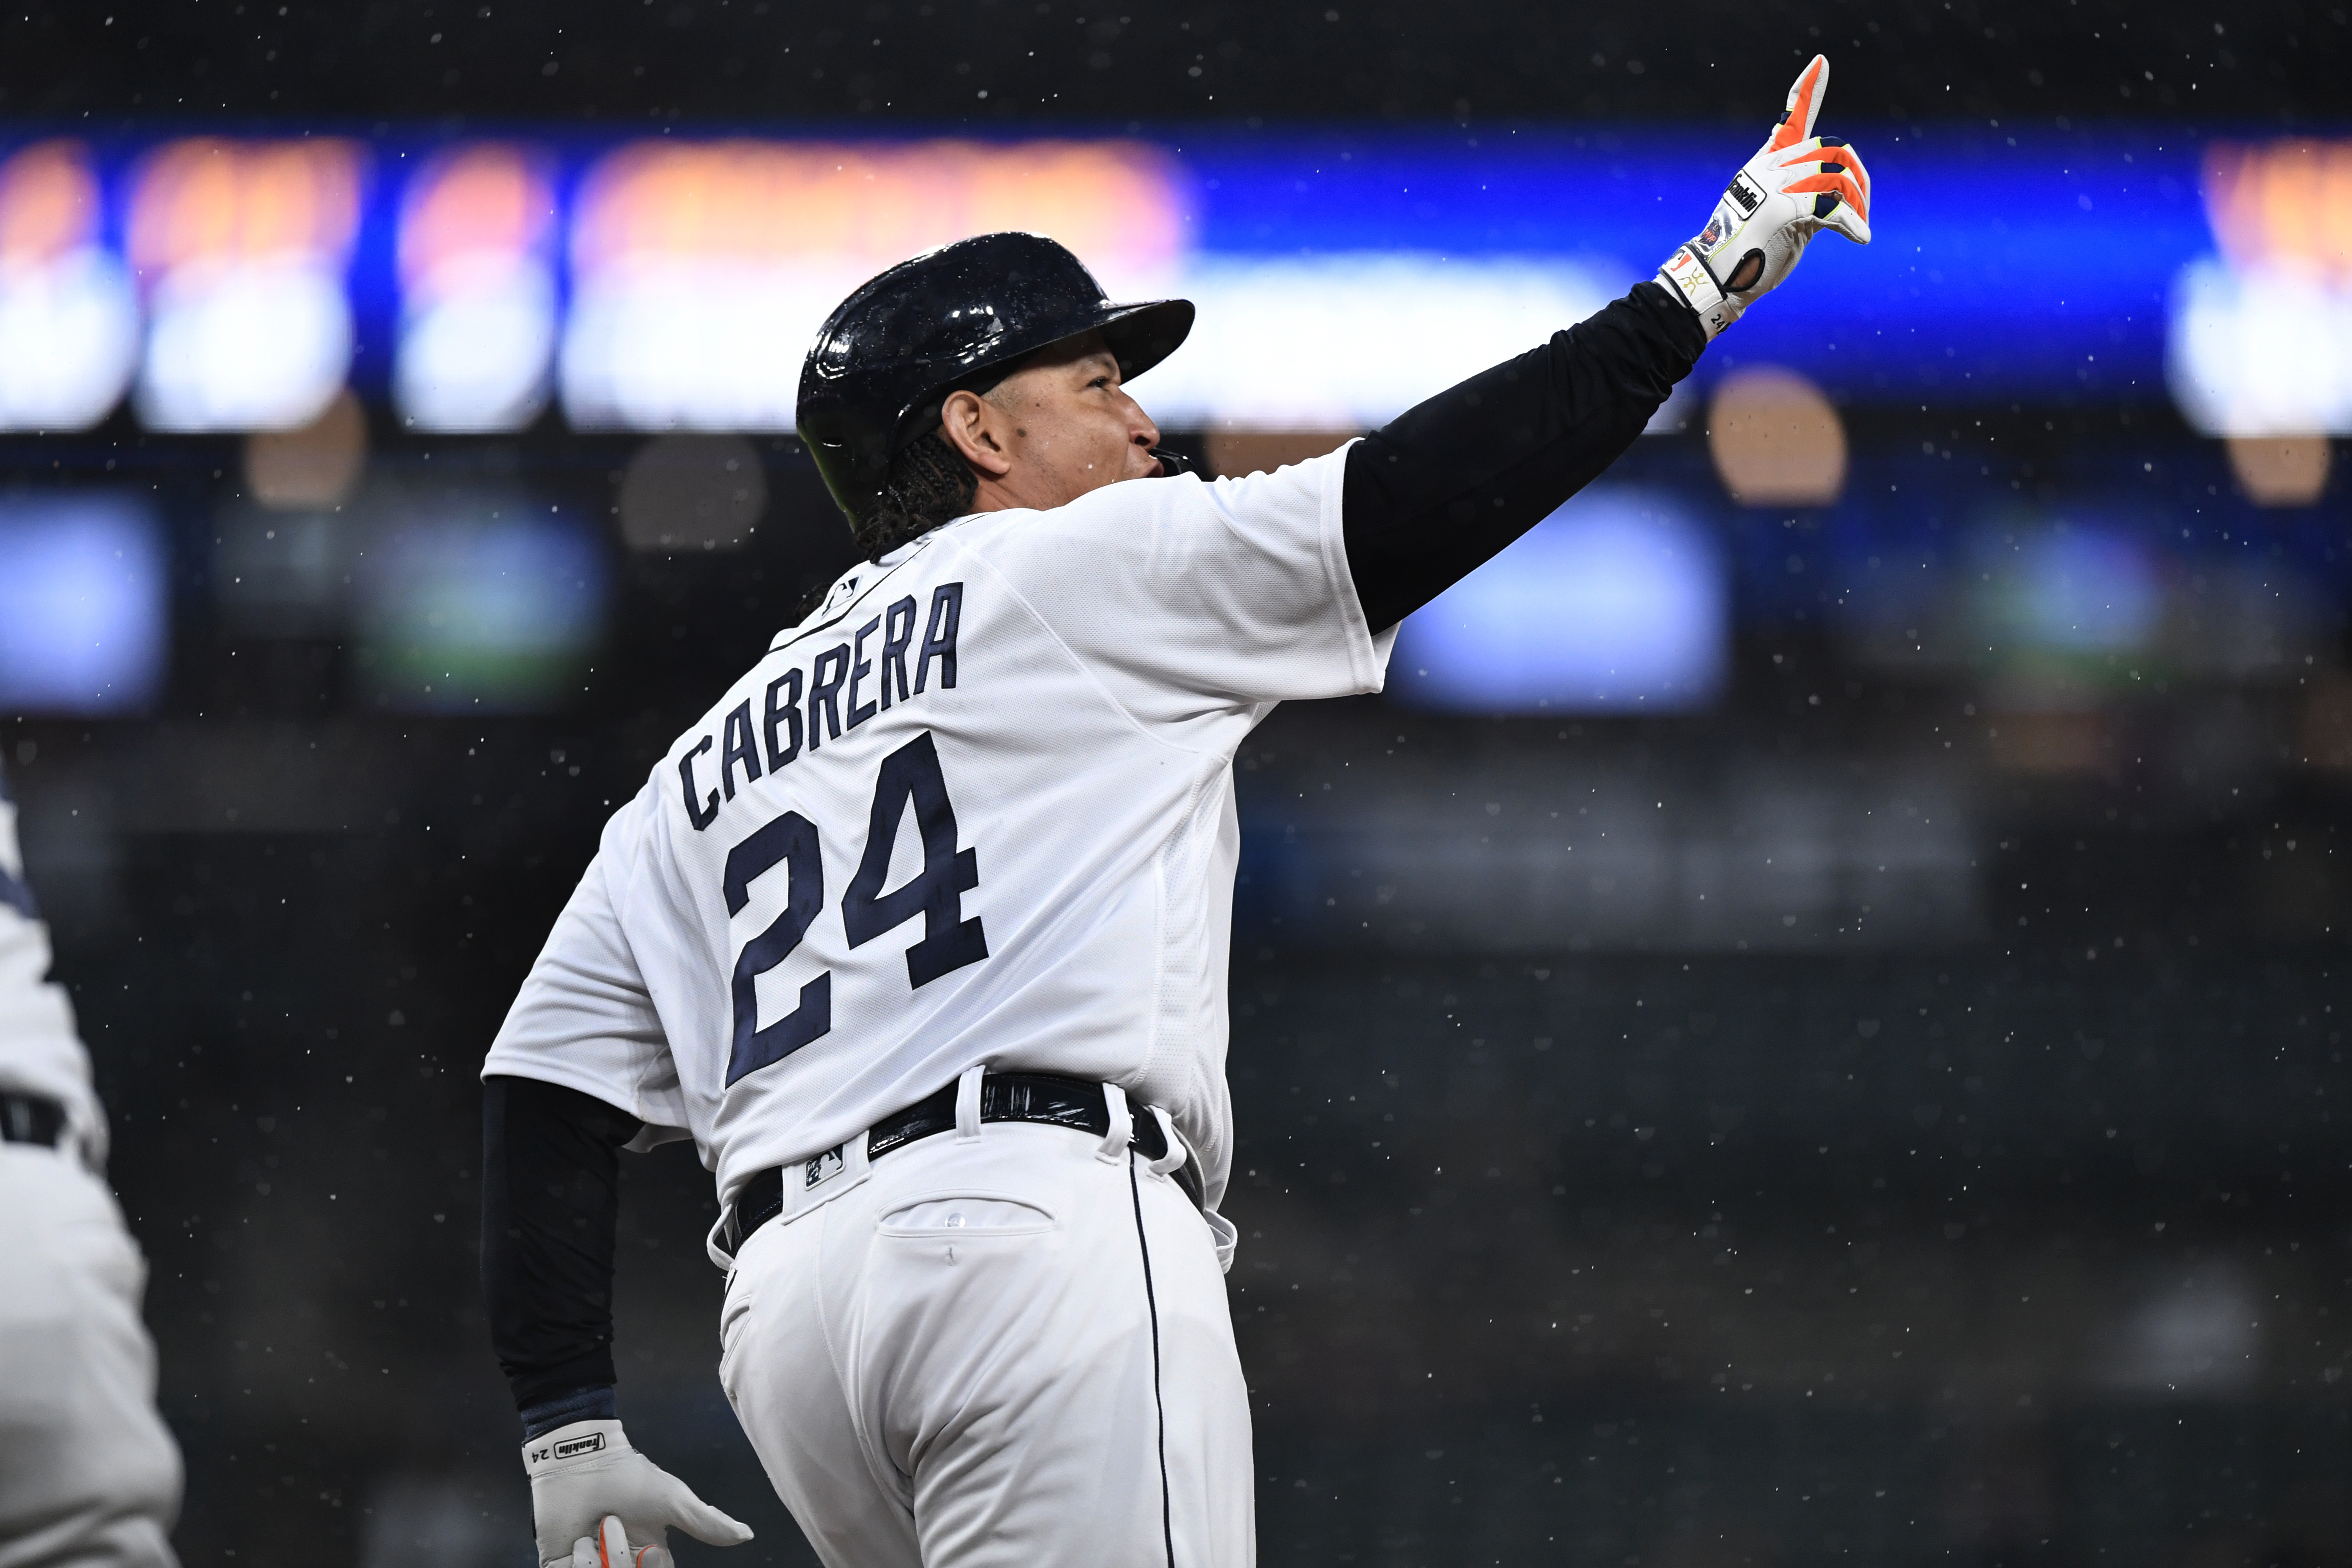 Miguel Cabrera's 511th home run lifts Tigers, who sweep Royals